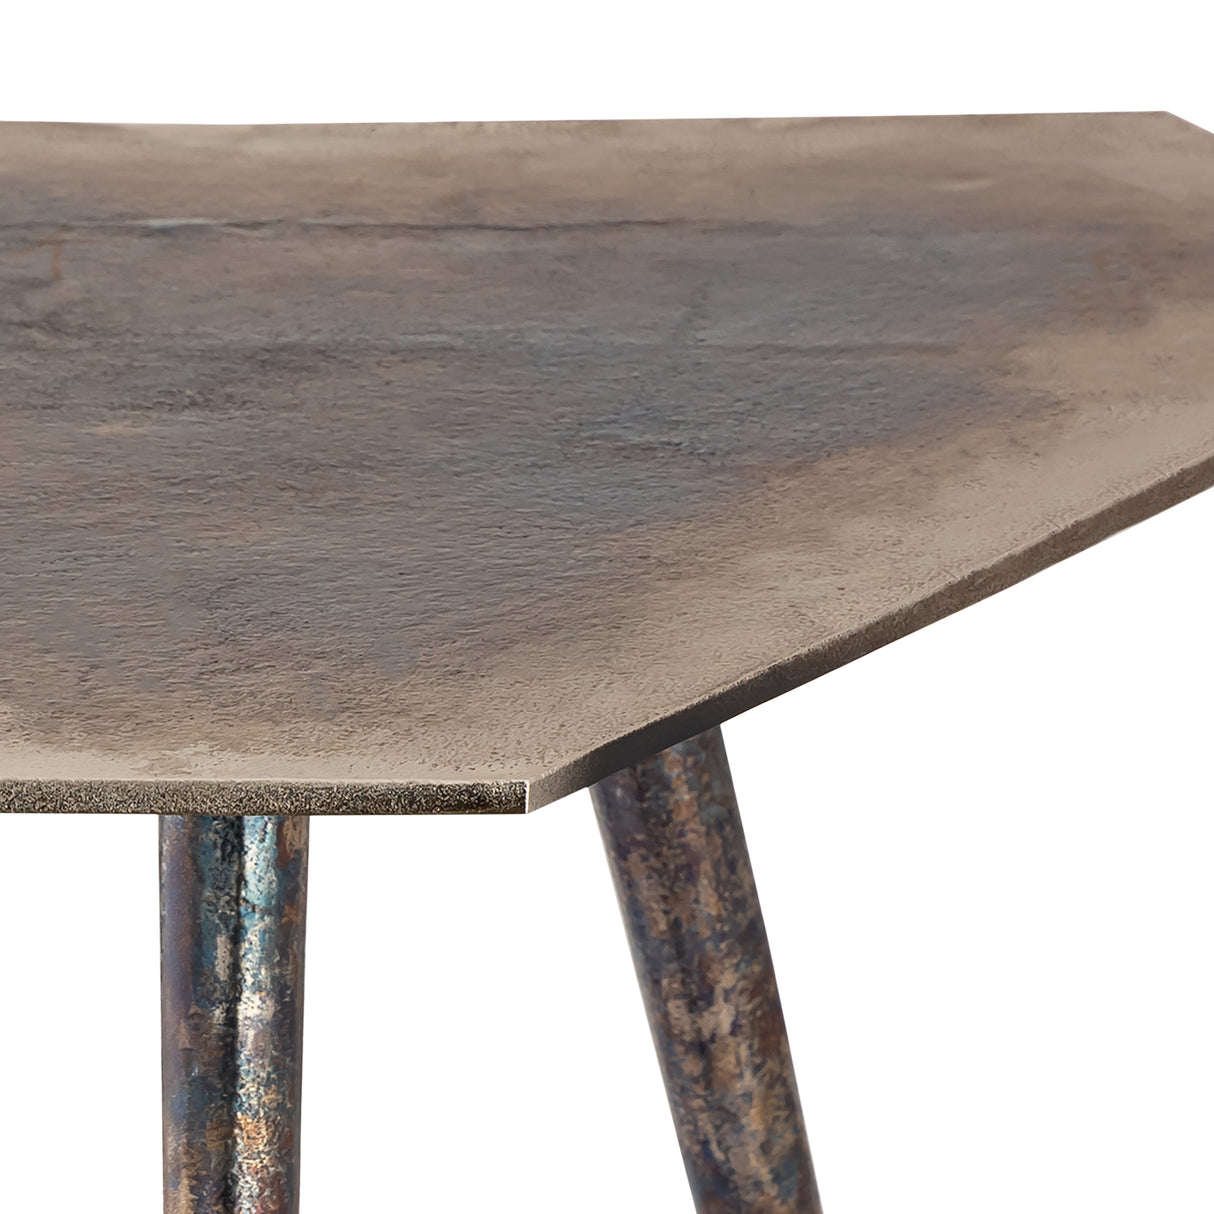 Elk H0895-10480 Carleton Accent Table - Oxidized Nickle